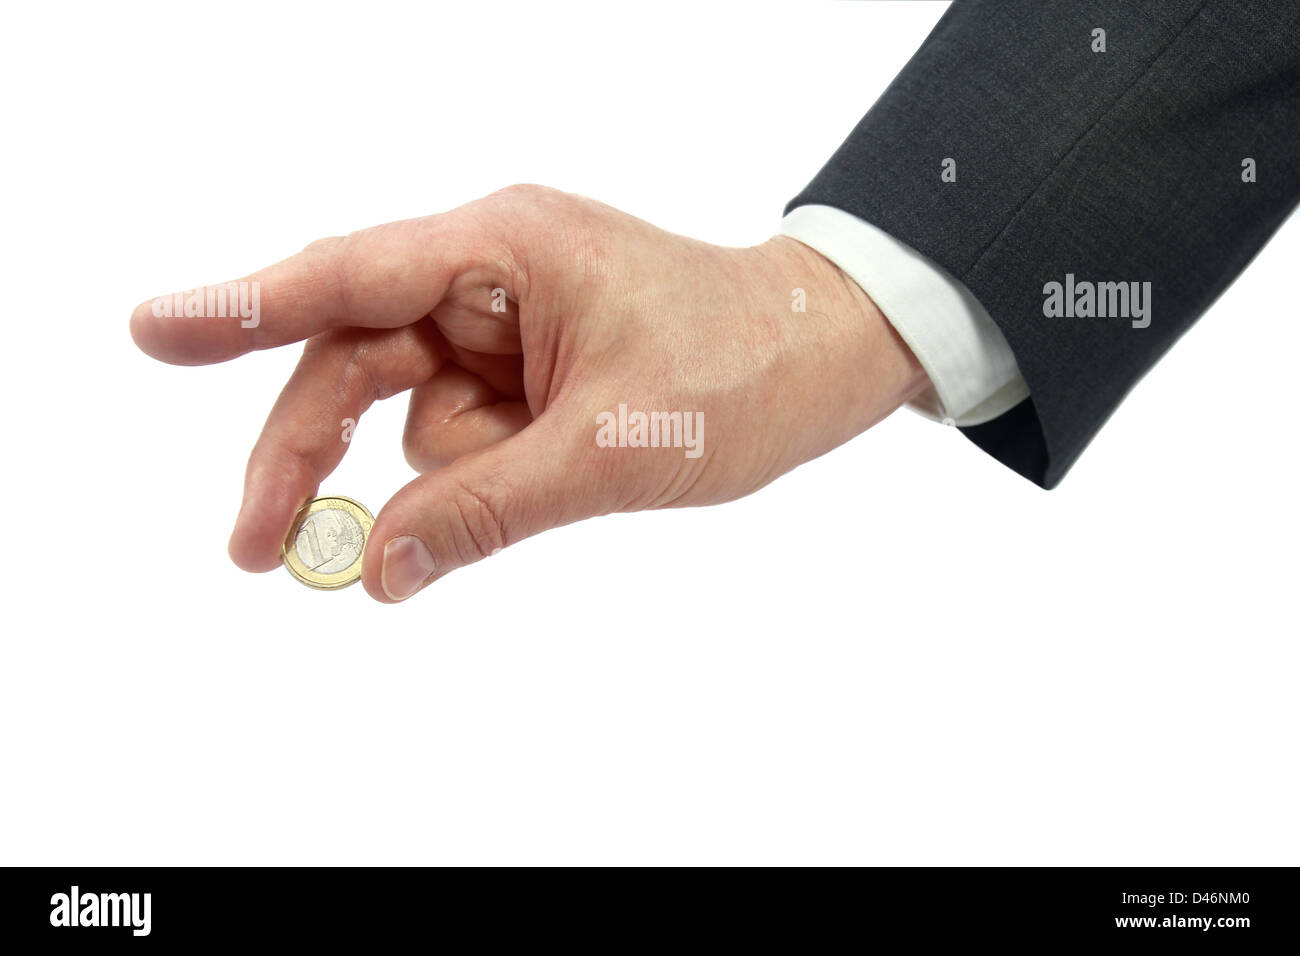 business hand holding one euro coin isolated on white background Stock Photo